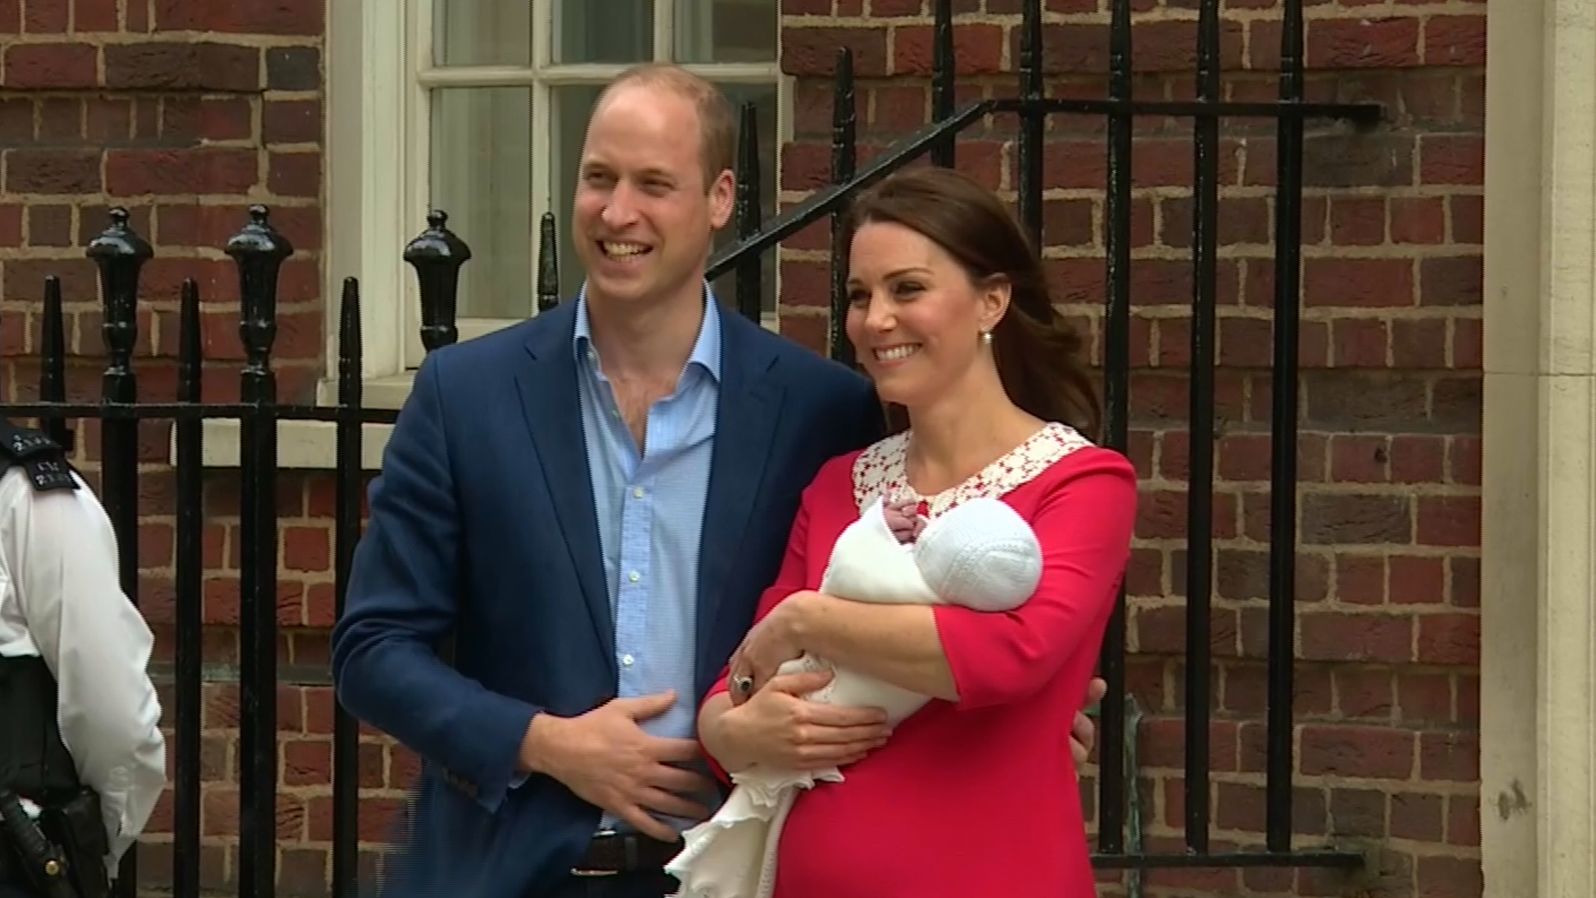 The Duke and Duchess of Cambridge appeared for a photo call outside the Lindo Wing of St Mary's hospital in London only hours after Kate gave birth to Prince Louis in April 2018.